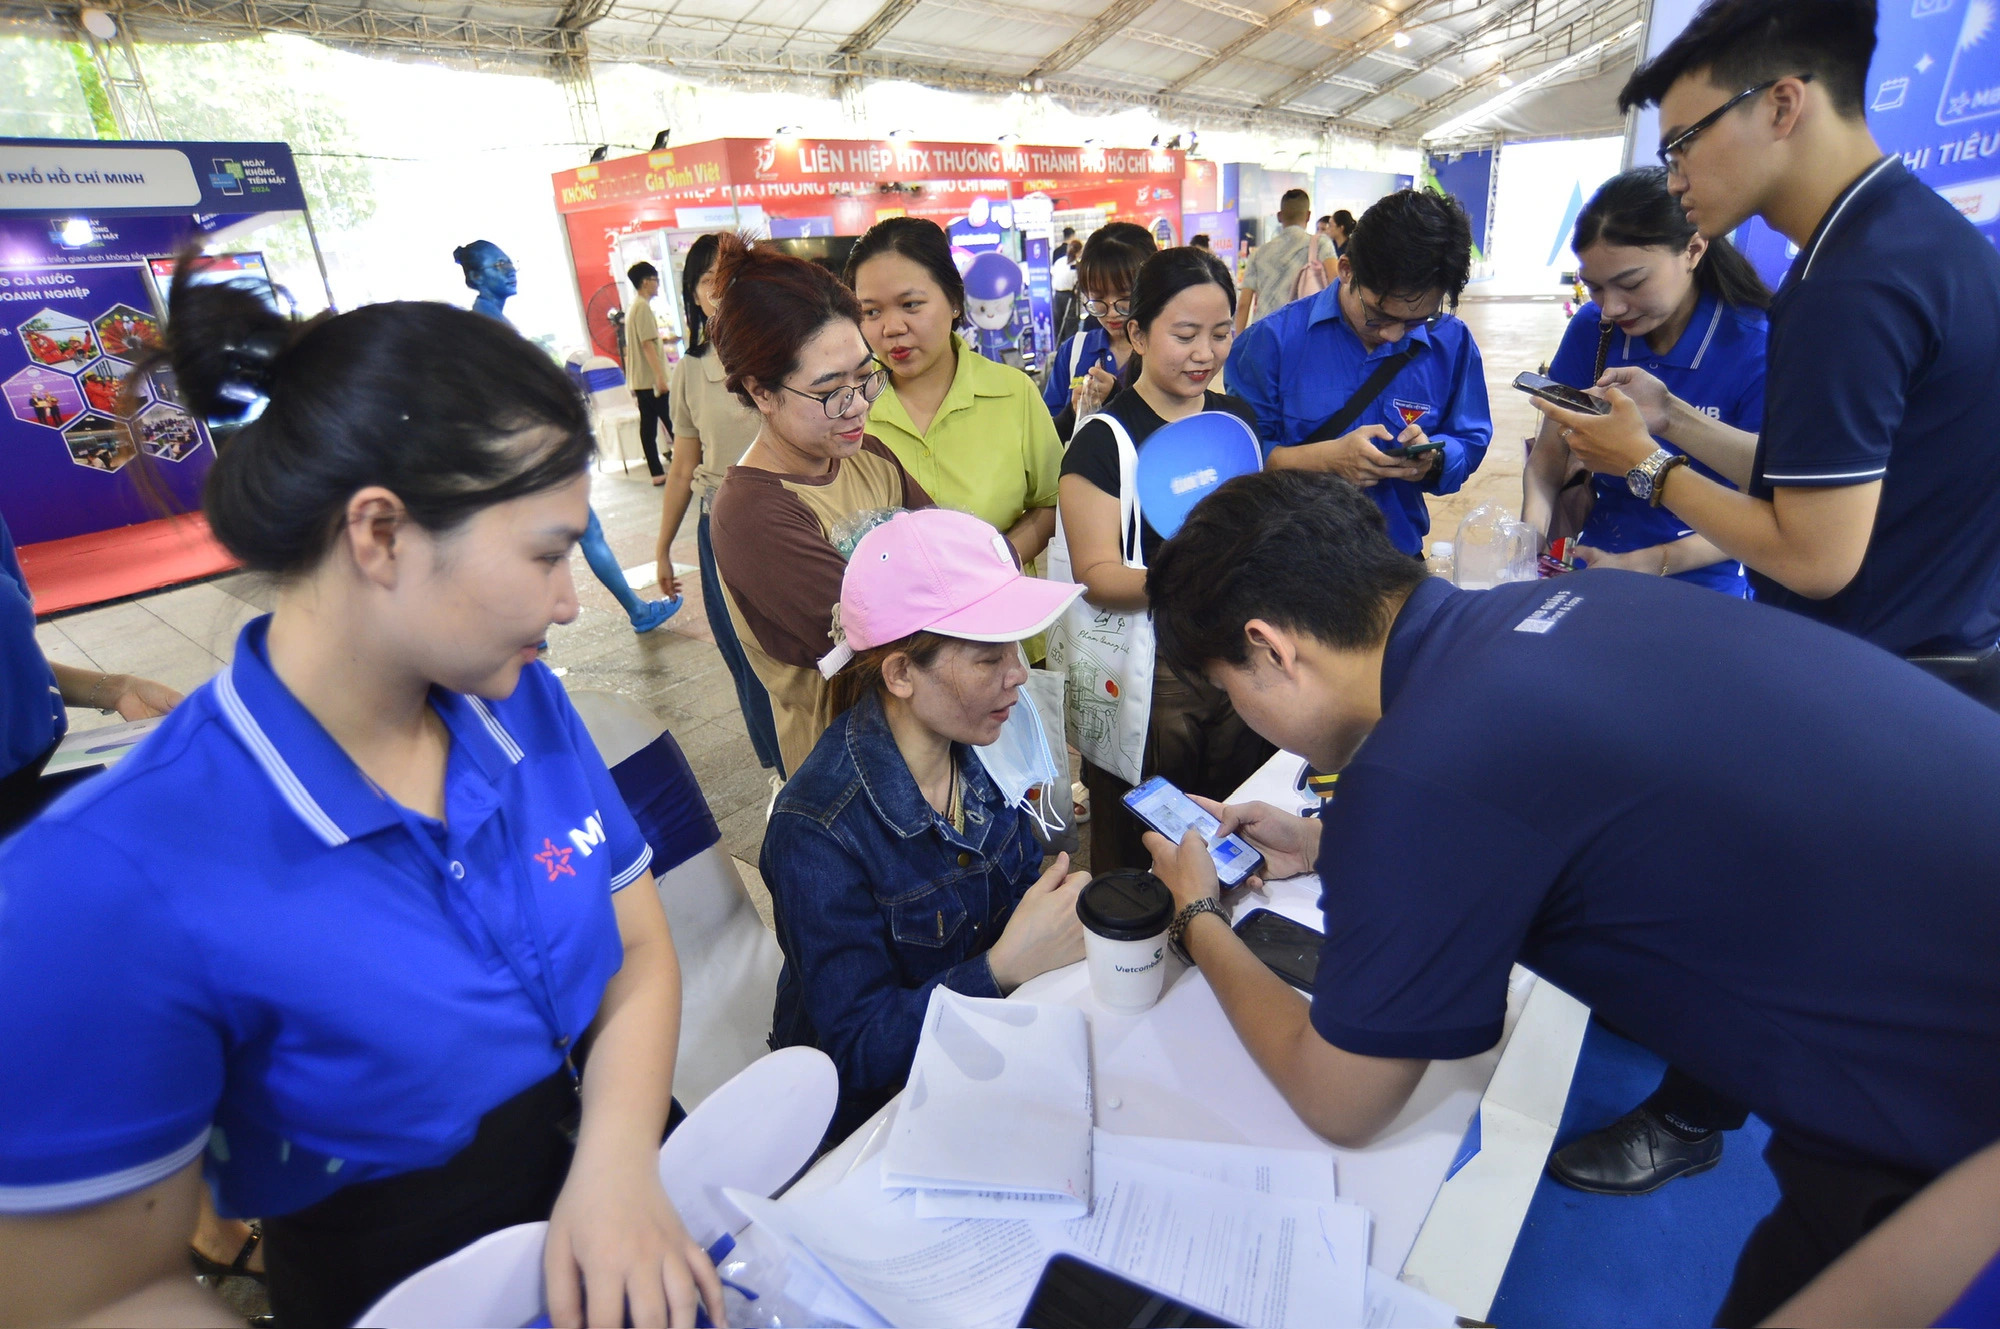 Visitors try digital banking services offered by Military Commercial Joint Stock Bank (MB Bank). Photo: Quang Dinh / Tuoi Tre